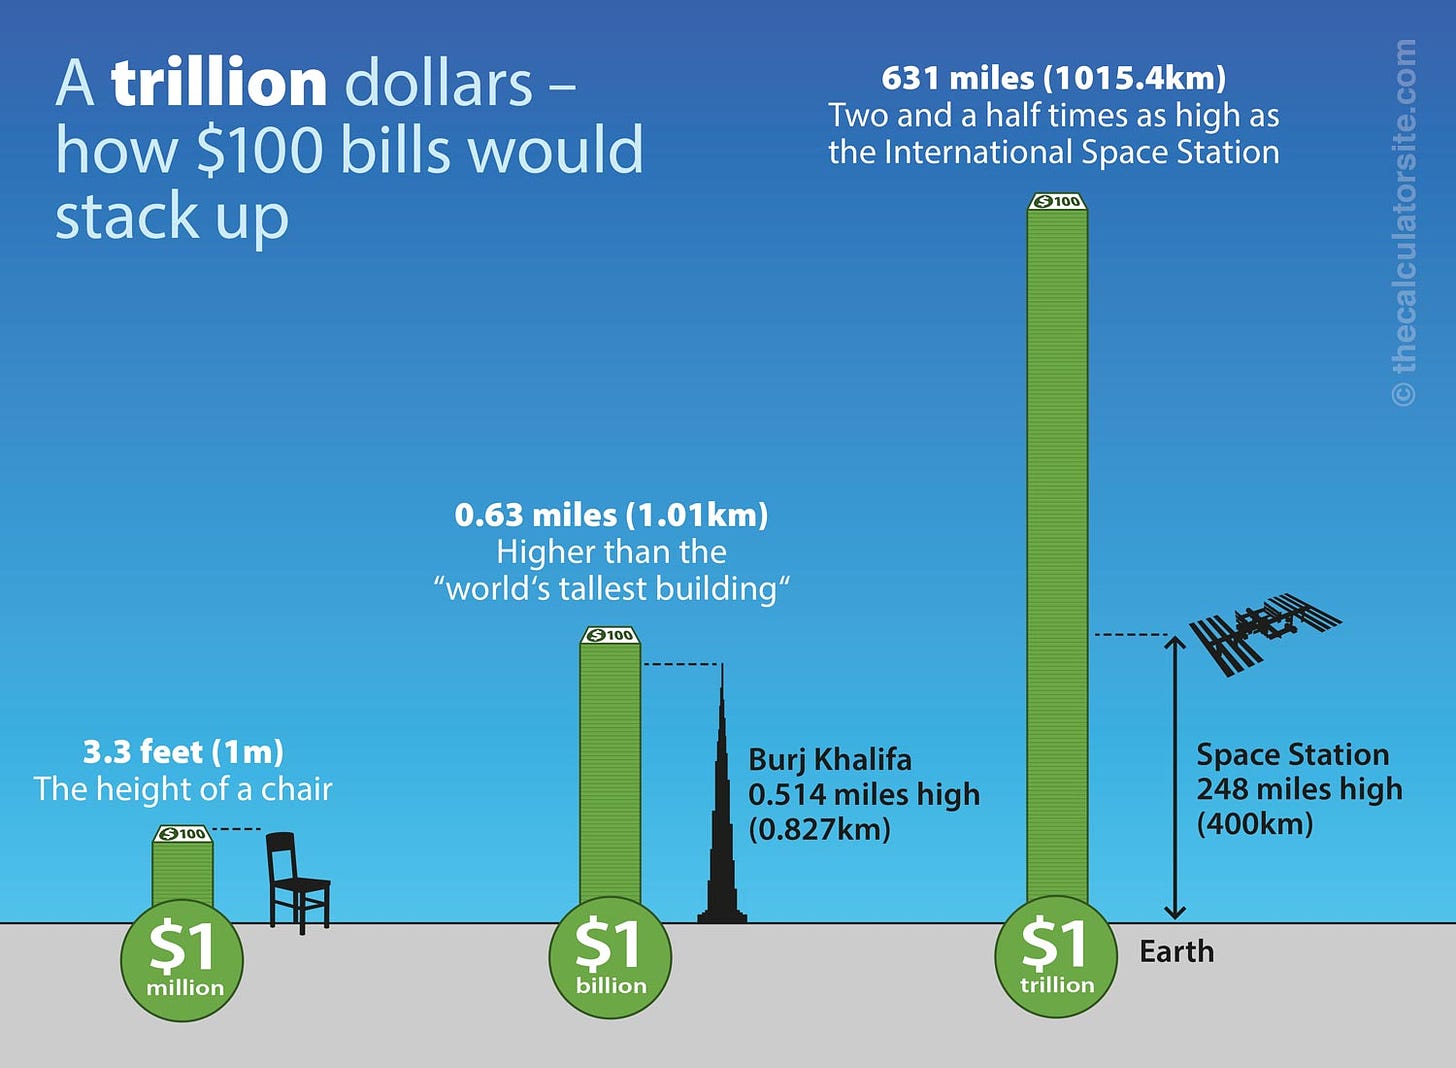 So... just how concerned should we be about America's $28 trillion debt?